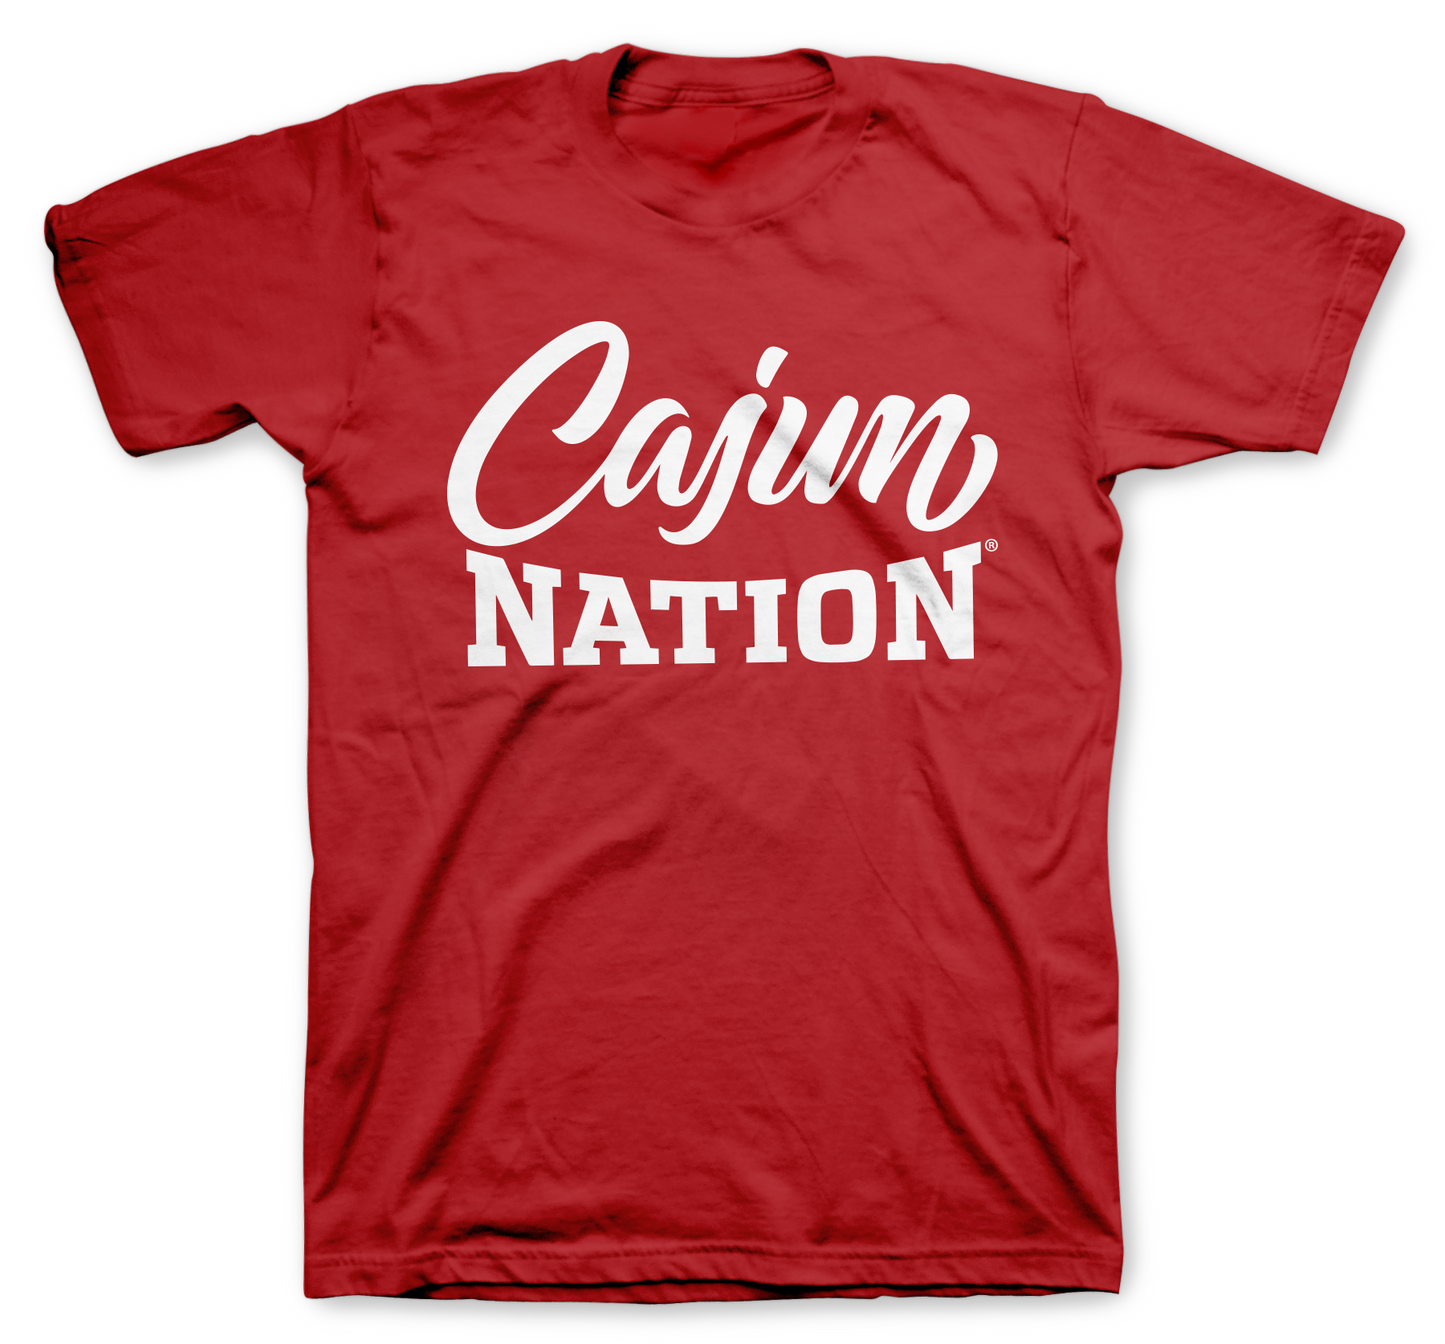 Cajun Nation Red Classic T-Shirt 4.3 oz., preshrunk 100% combed ring-spun cotton Seamed collar Shoulder-to shoulder tape Features a TearAway label Tubular construction Semi-fitted Double-needle sleeve and bottom hem Oeko-Tex® Standard 100 Certified Plastisol print